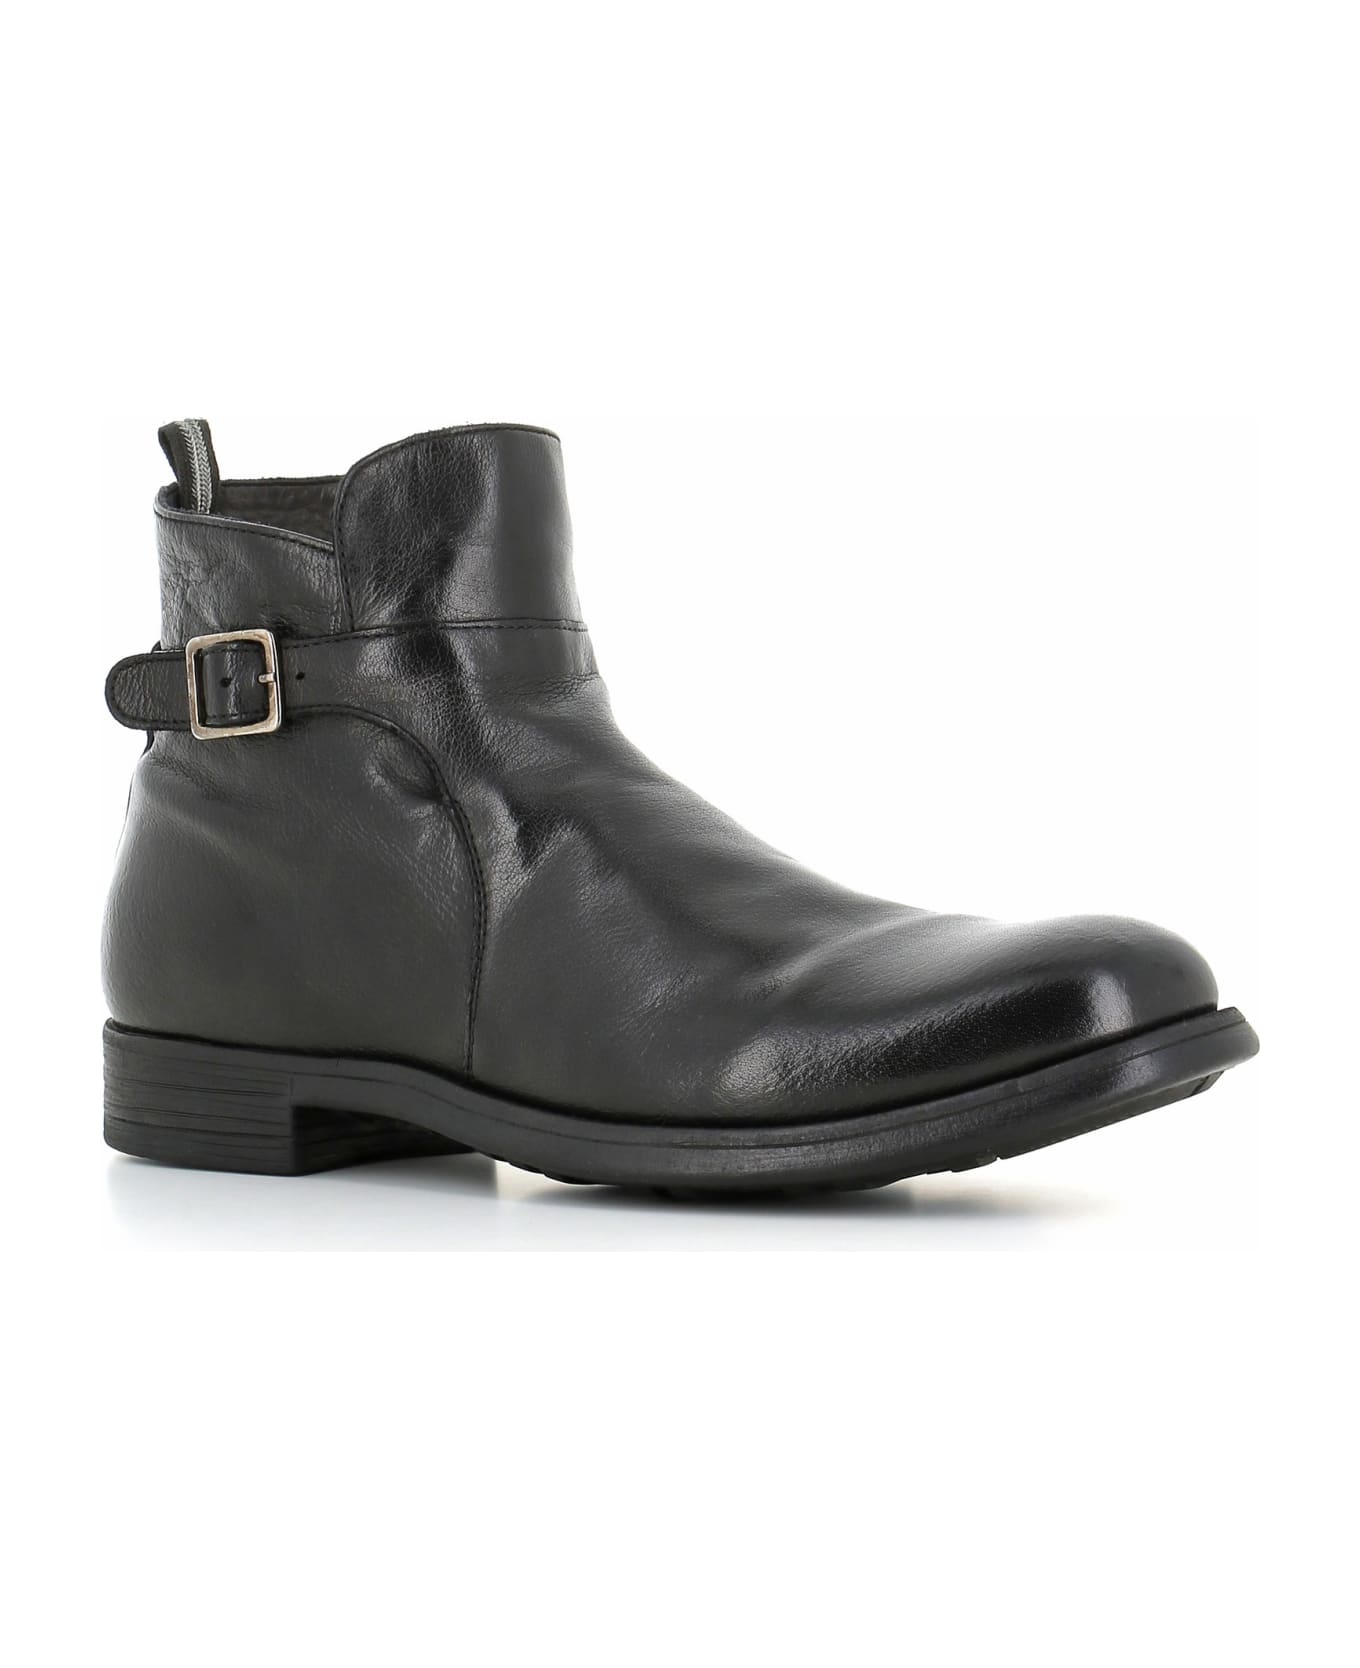 Officine Creative Ankle Boot Chronicle/068 - Black ブーツ